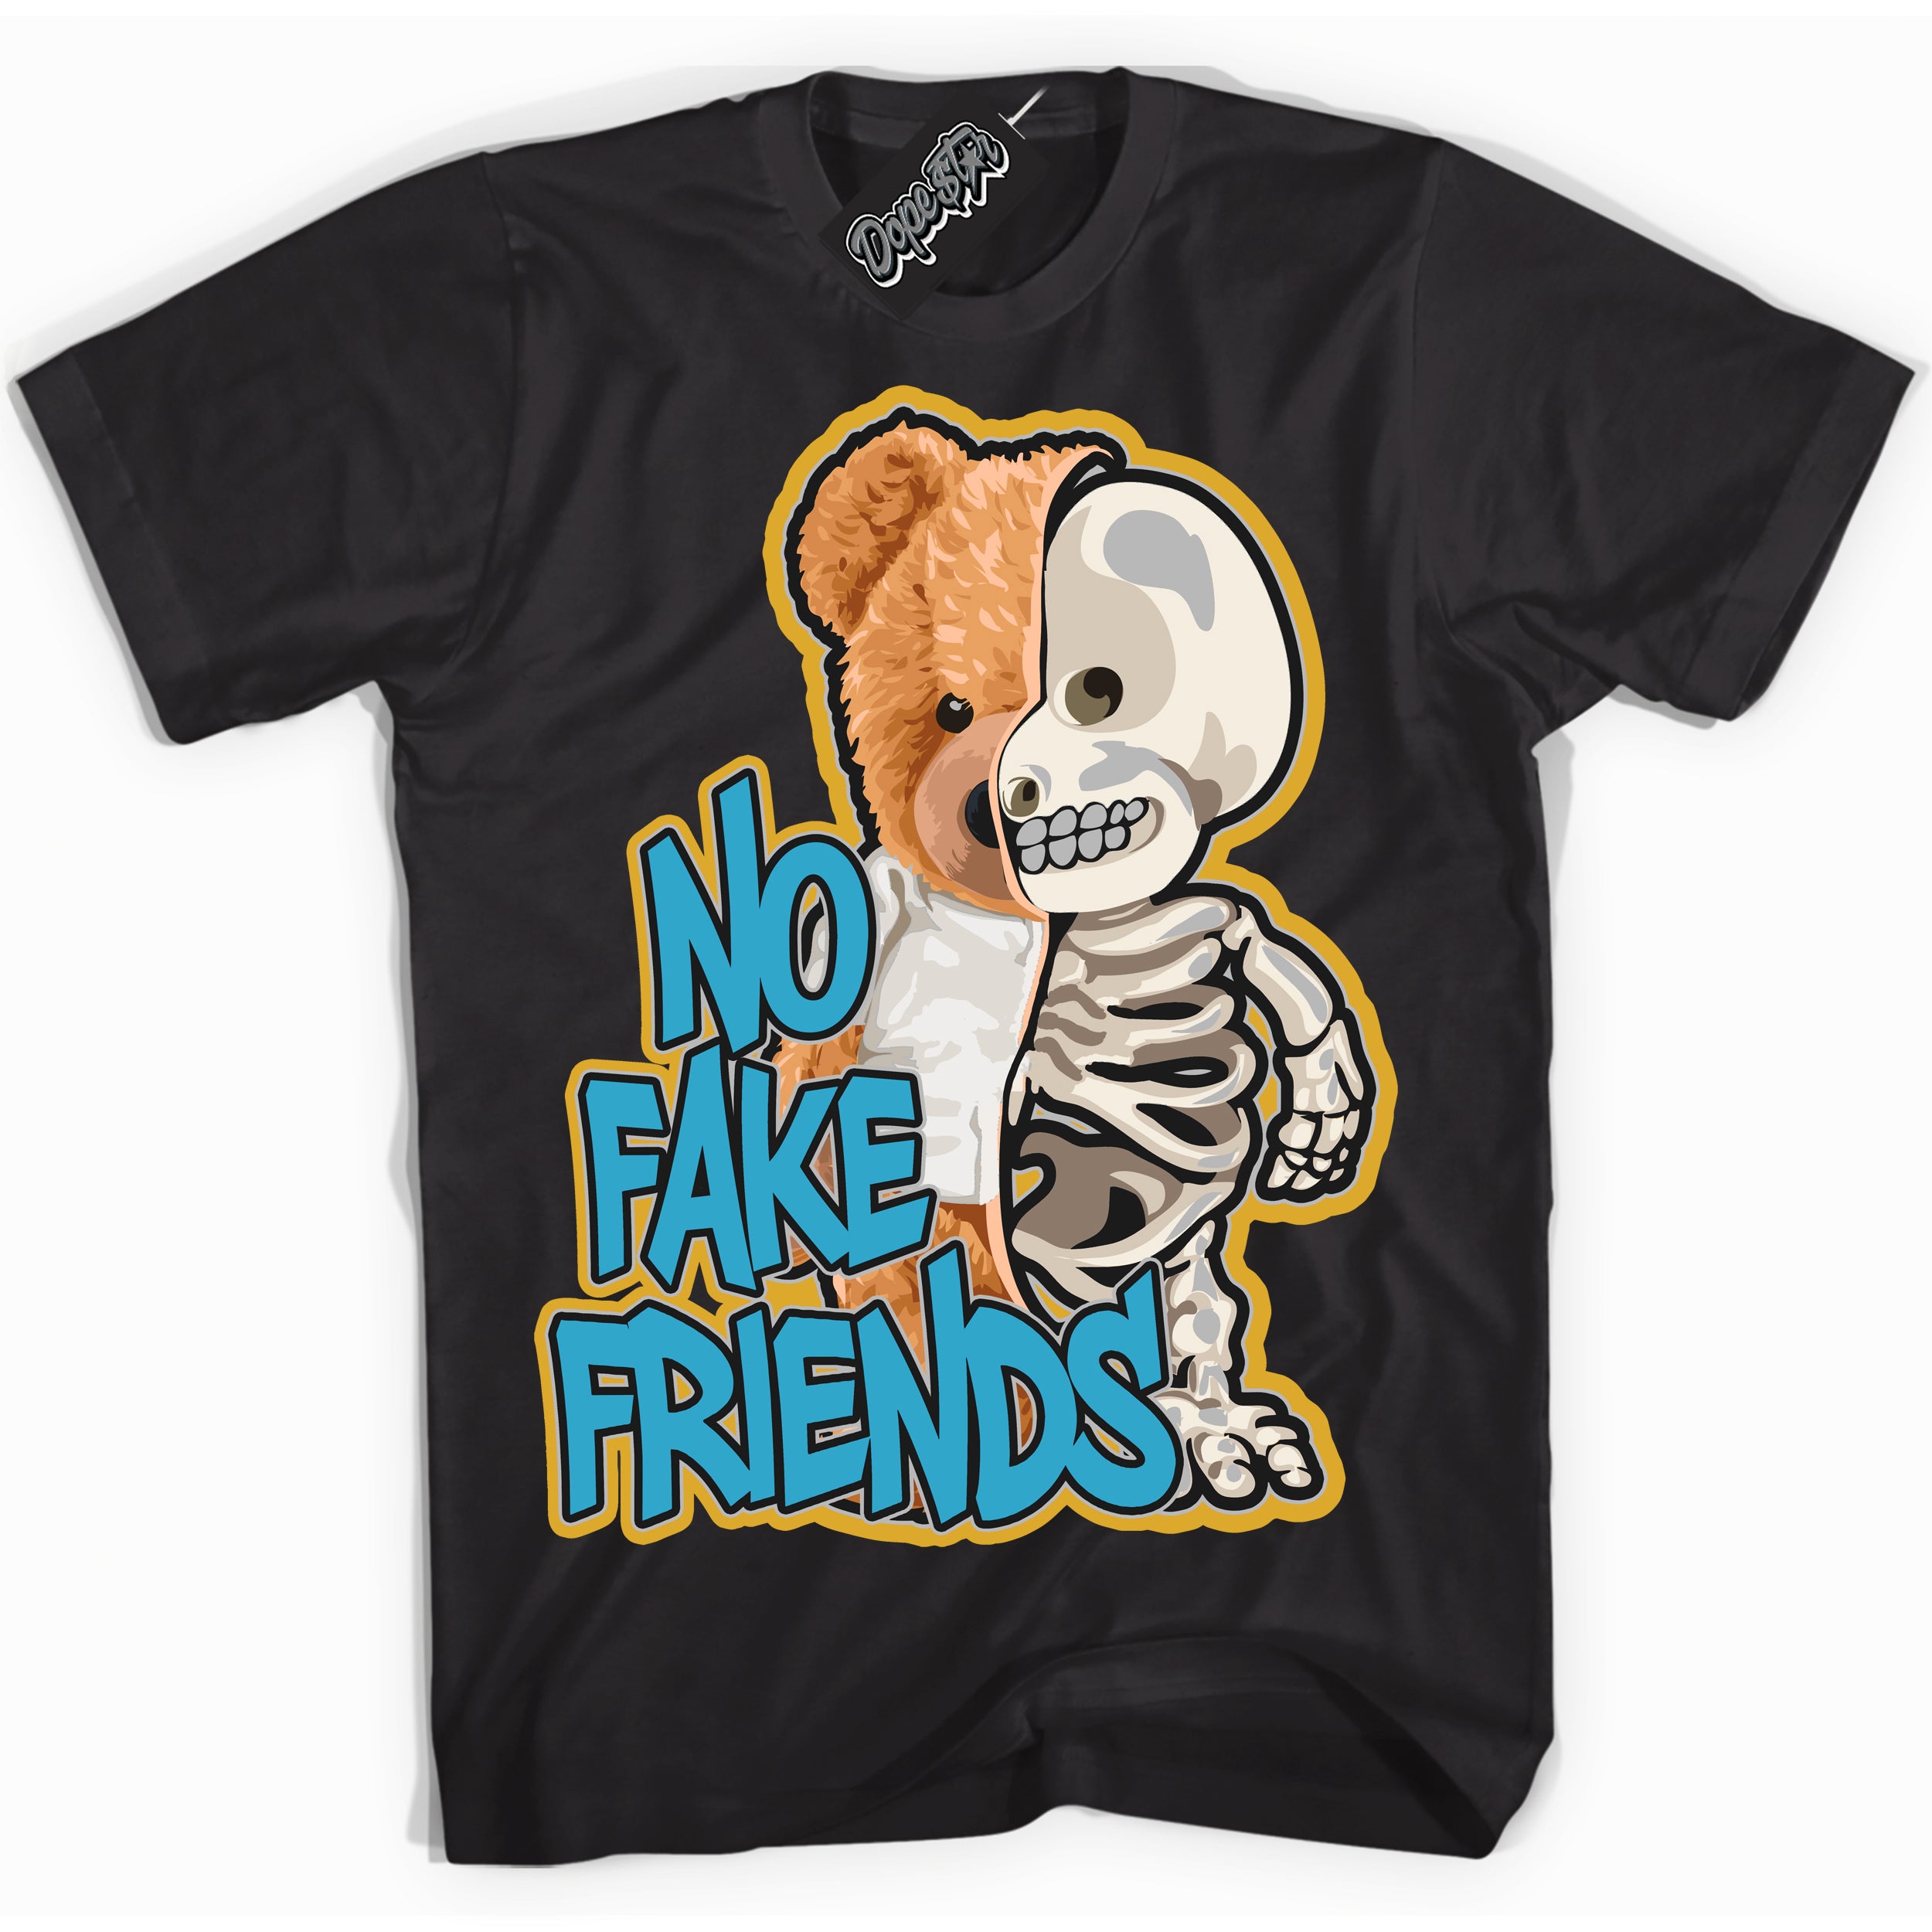 Cool Black Shirt with “ No Fake Friends” design that perfectly matches Aqua 5s Sneakers.